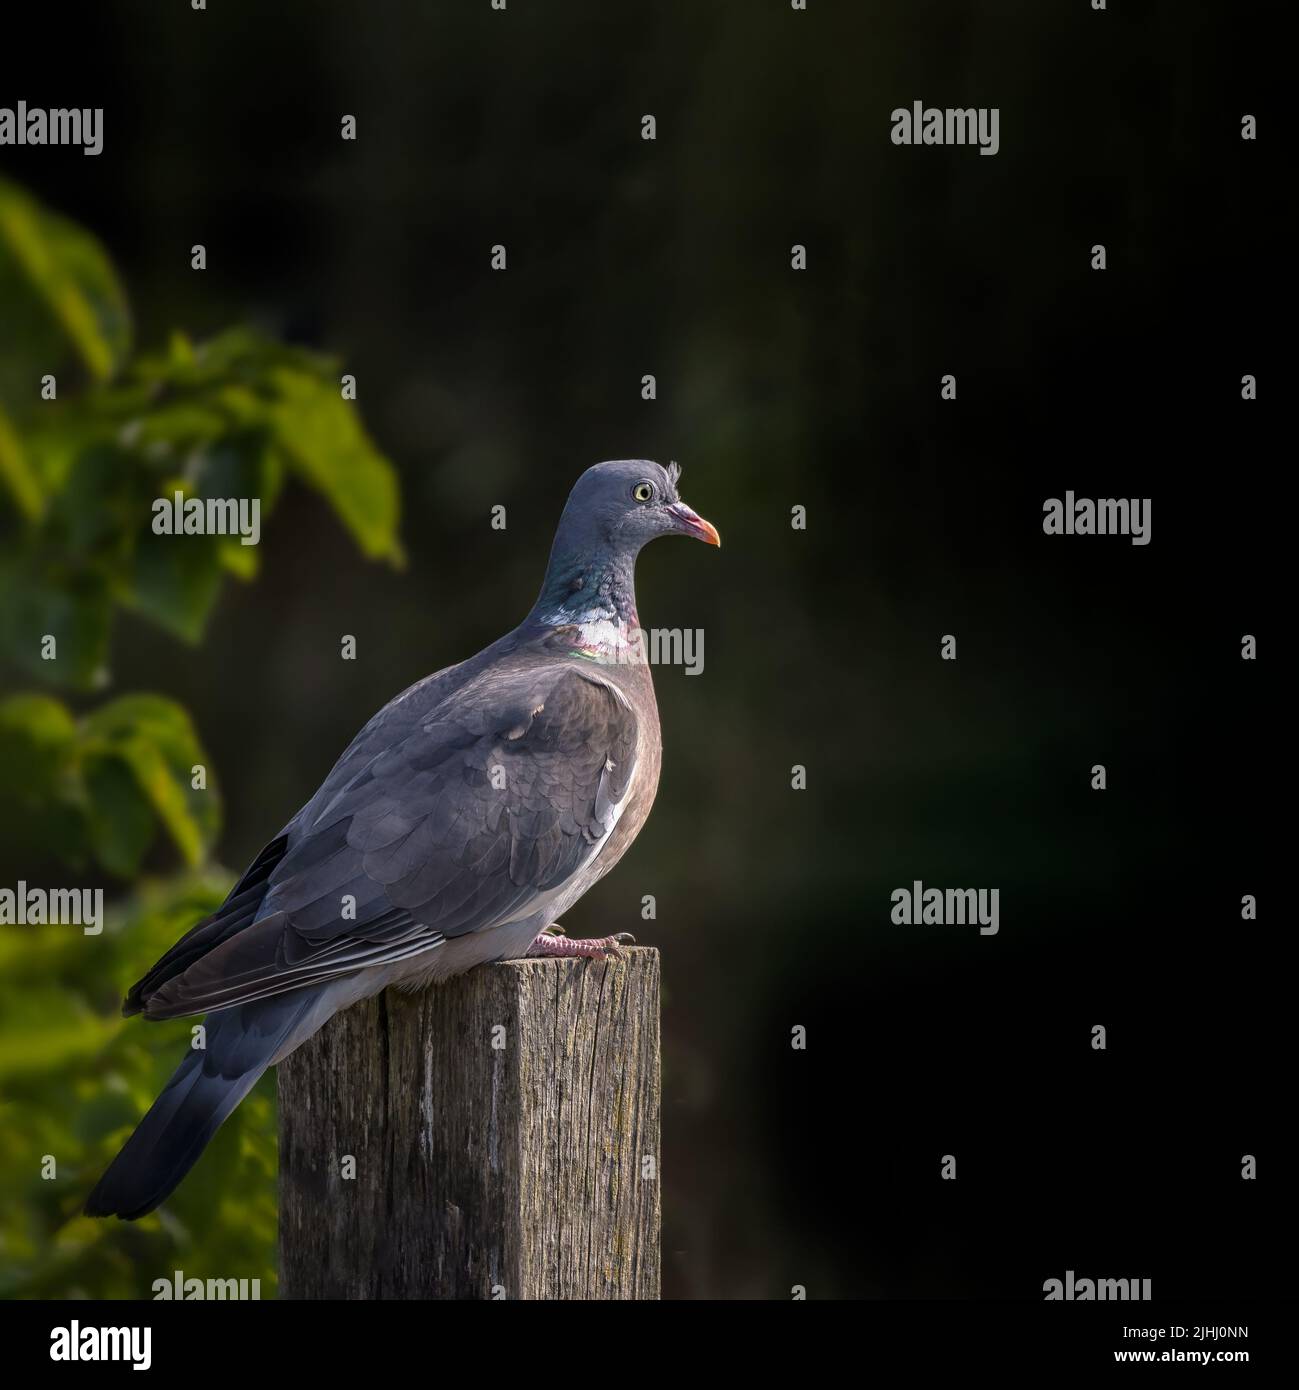 Portrait of a Wood Pigeon (Columba palumbus) perched on a fence post against a dark background Stock Photo